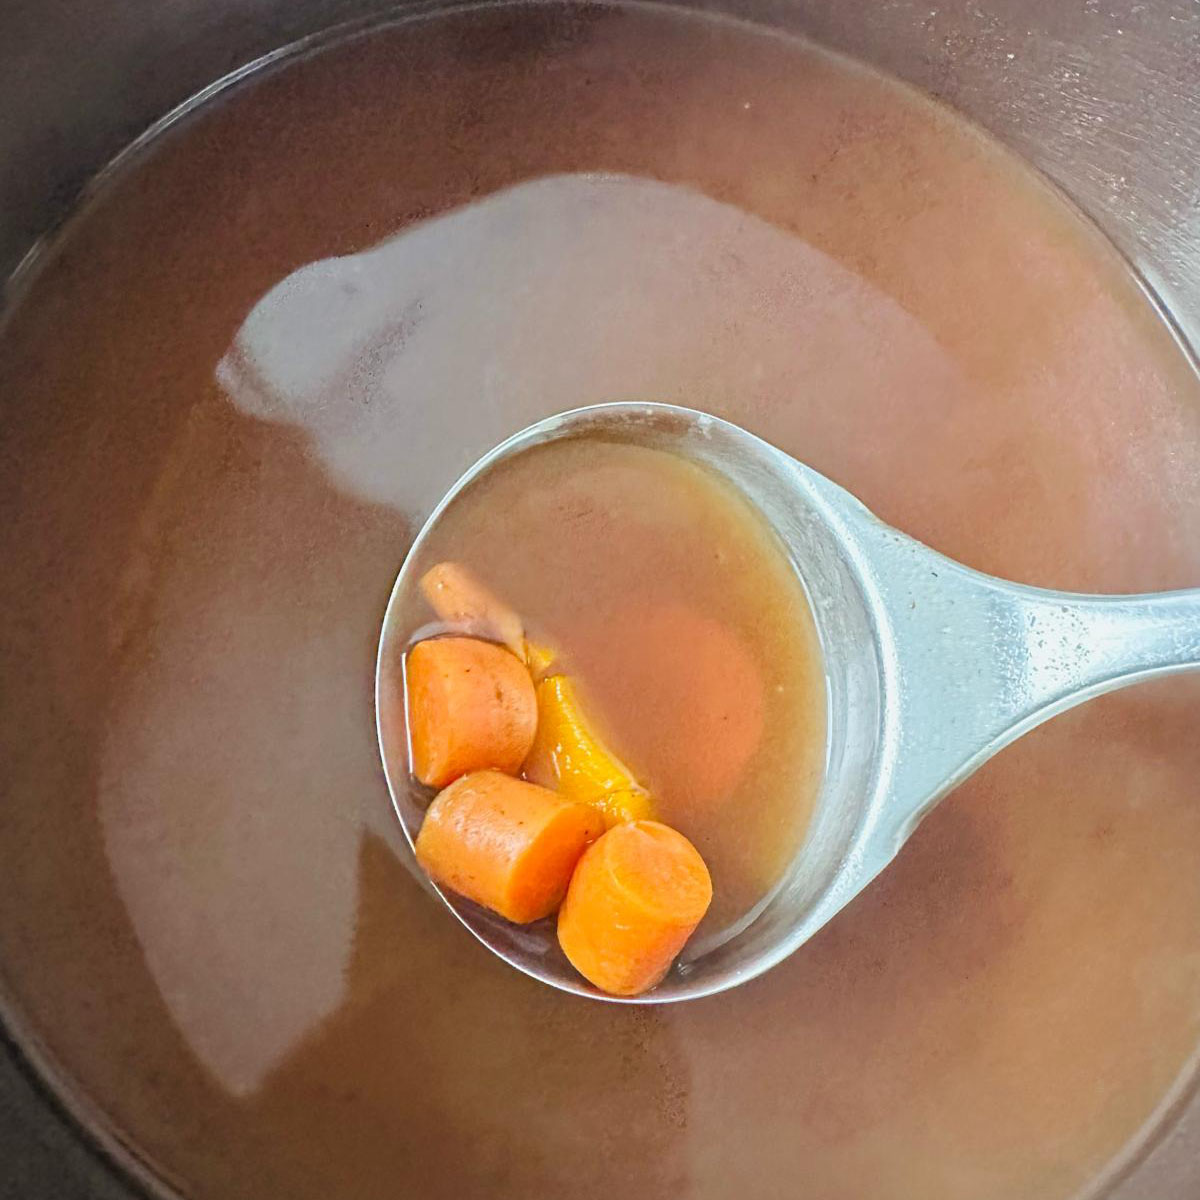 A pot of thin broth with pieces of carrot visible in a spoon.